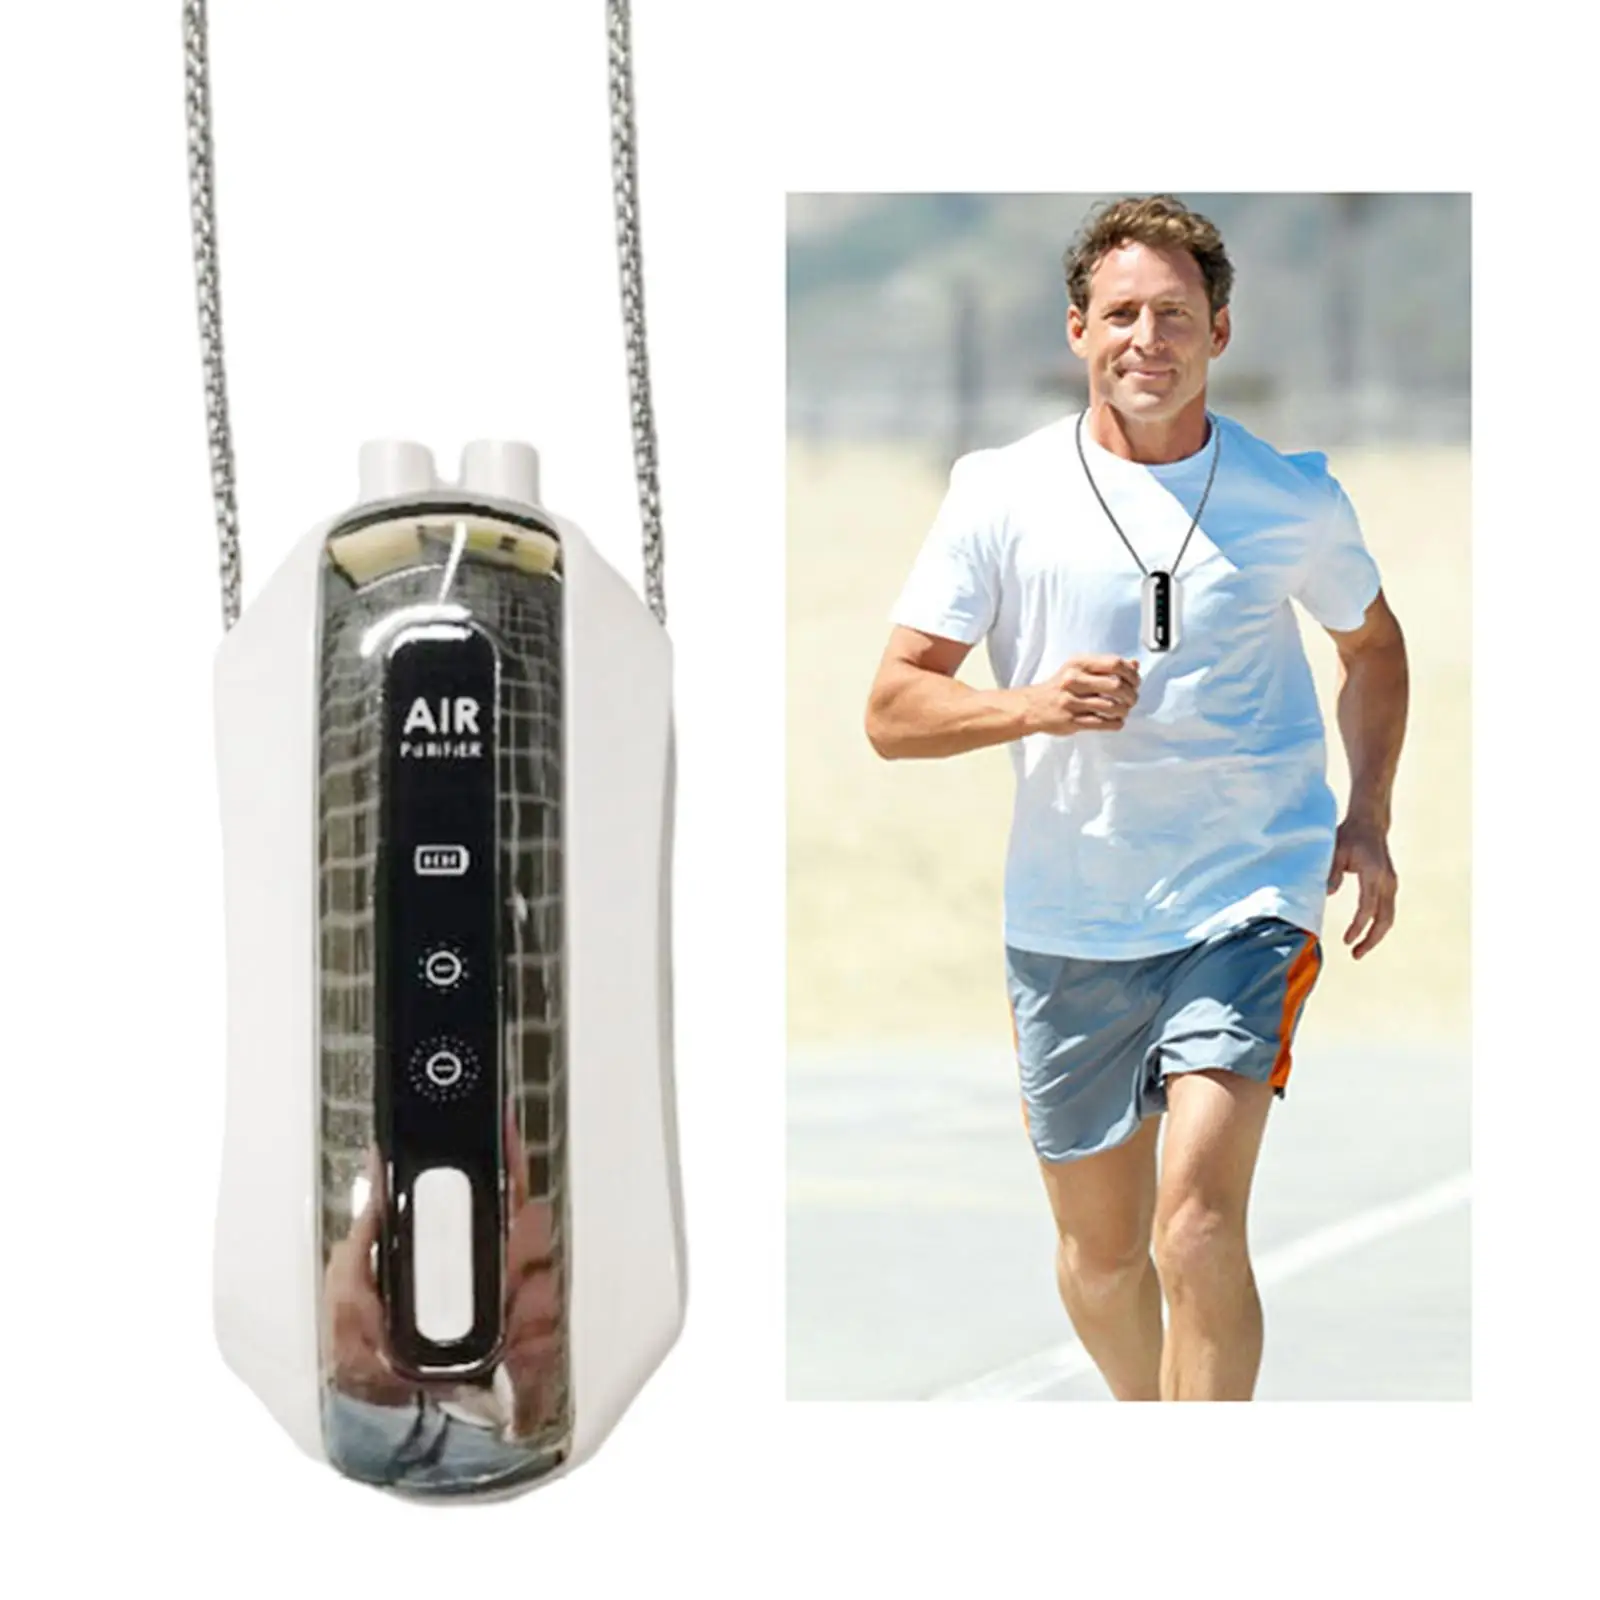 Neck Hanging Air Cleaner Negative Ions Generator Necklace Mini for Running